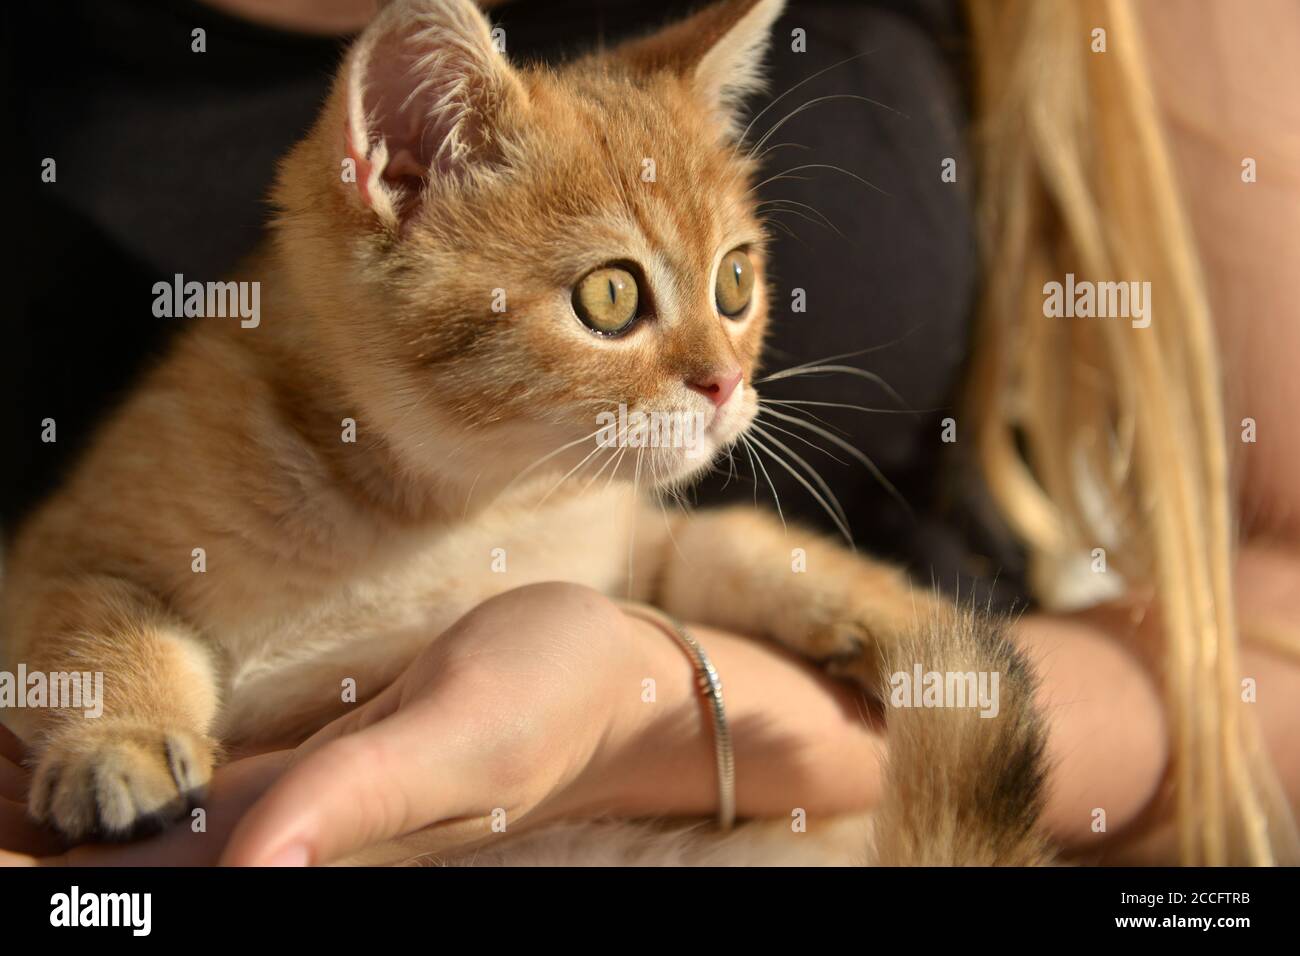 Little cute Scottish domestic kitten in girls hand. Cat and child at home. Kitten. Cute red kitten. Animals or pets concept. Day in the Life Series. Stock Photo